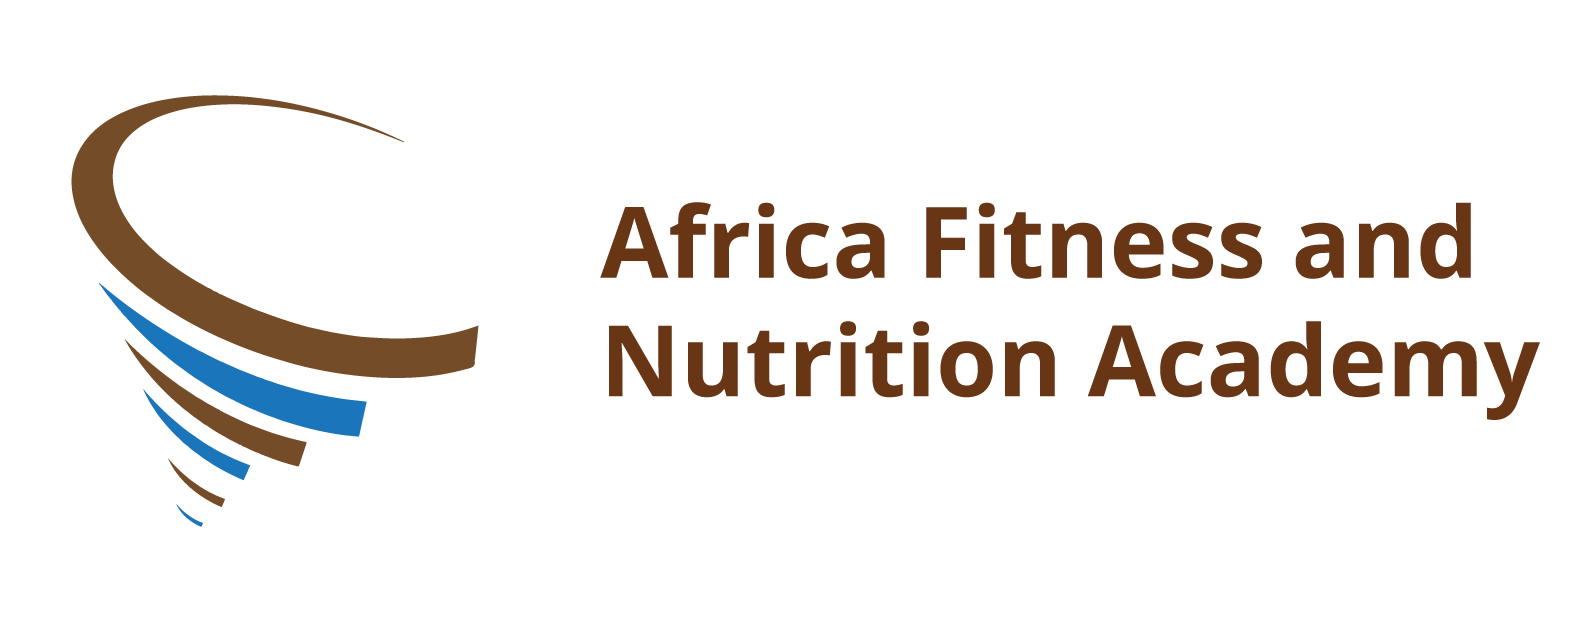 Africa Fitness and Nutrition Academy